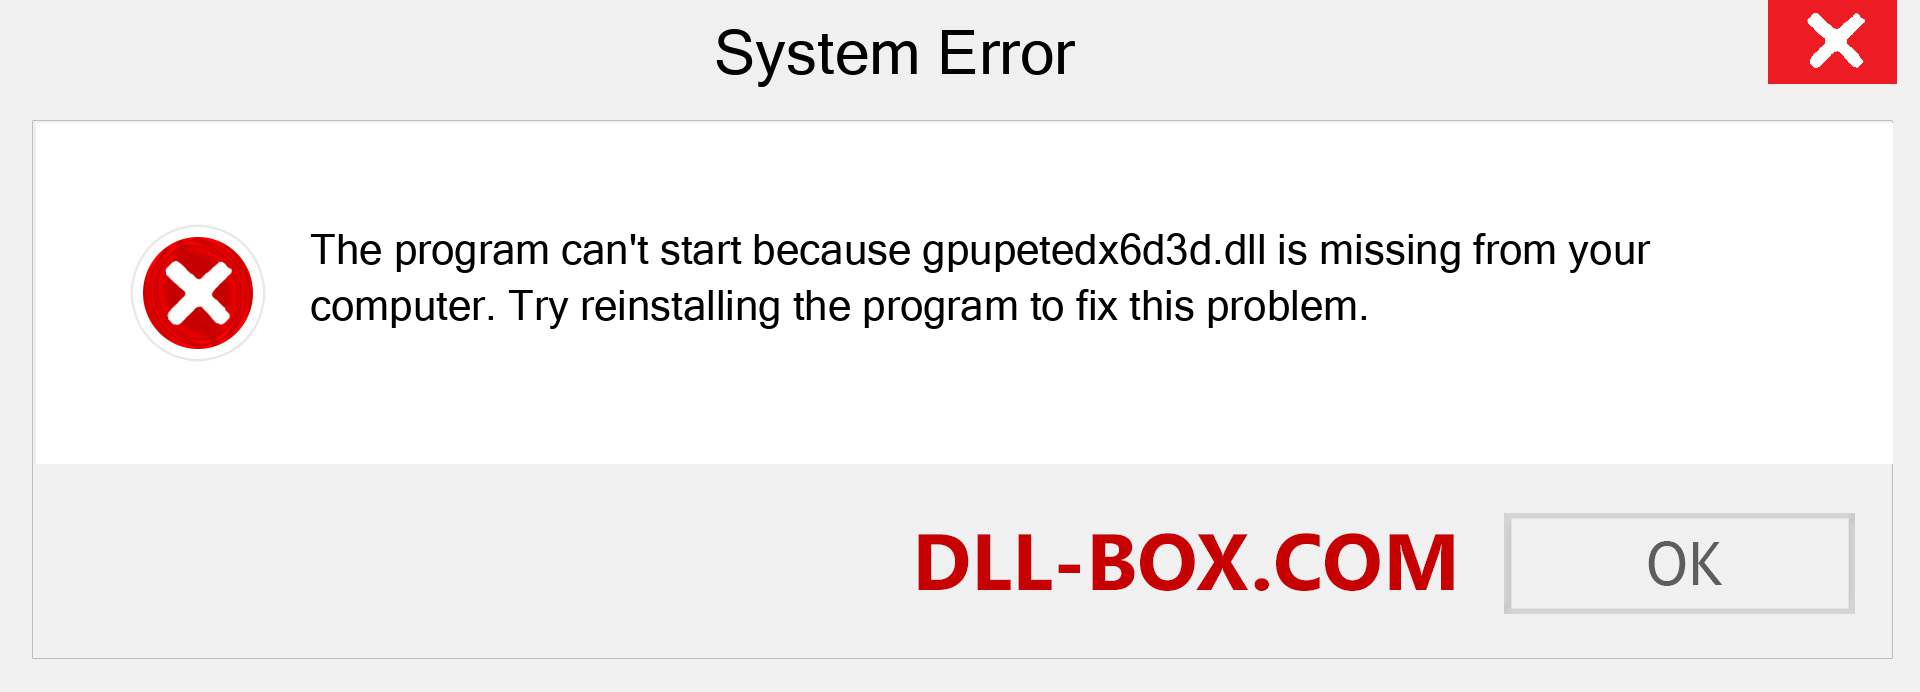  gpupetedx6d3d.dll file is missing?. Download for Windows 7, 8, 10 - Fix  gpupetedx6d3d dll Missing Error on Windows, photos, images